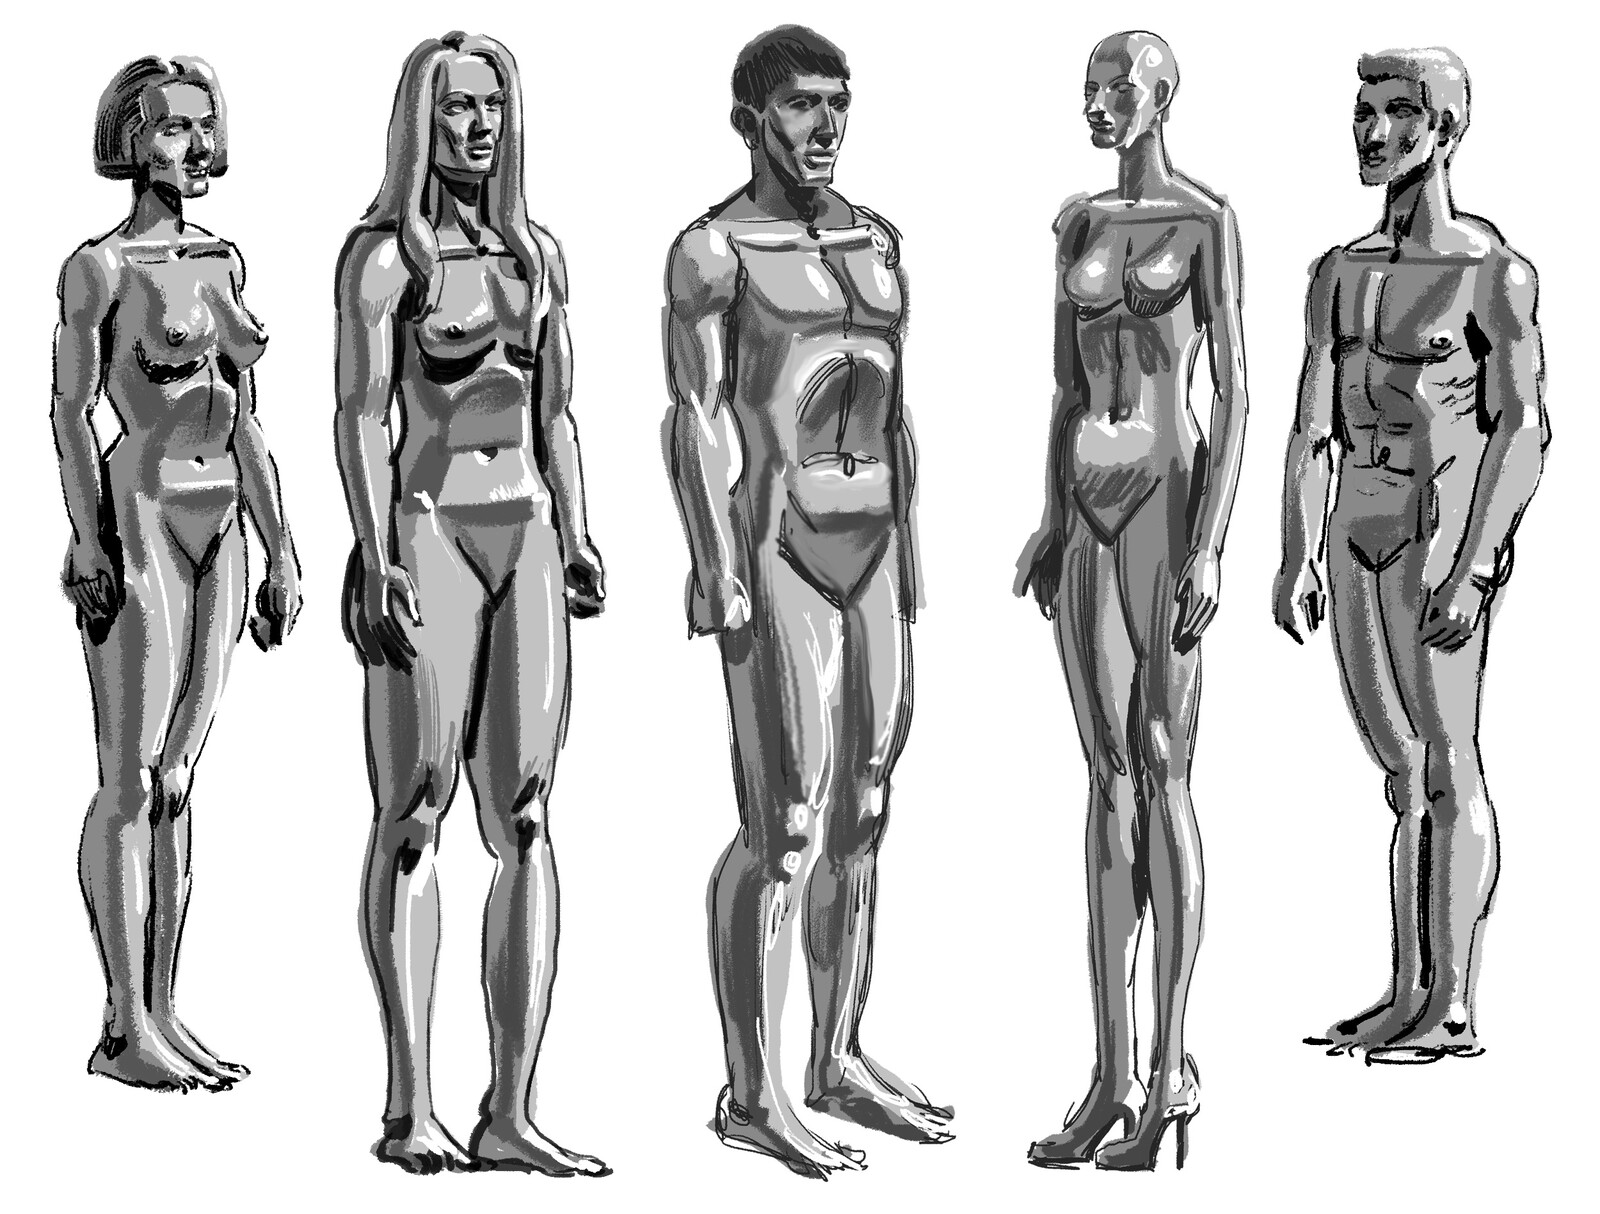 Project 12: Repeat project 11 and add 3D values to all the male and female figures.